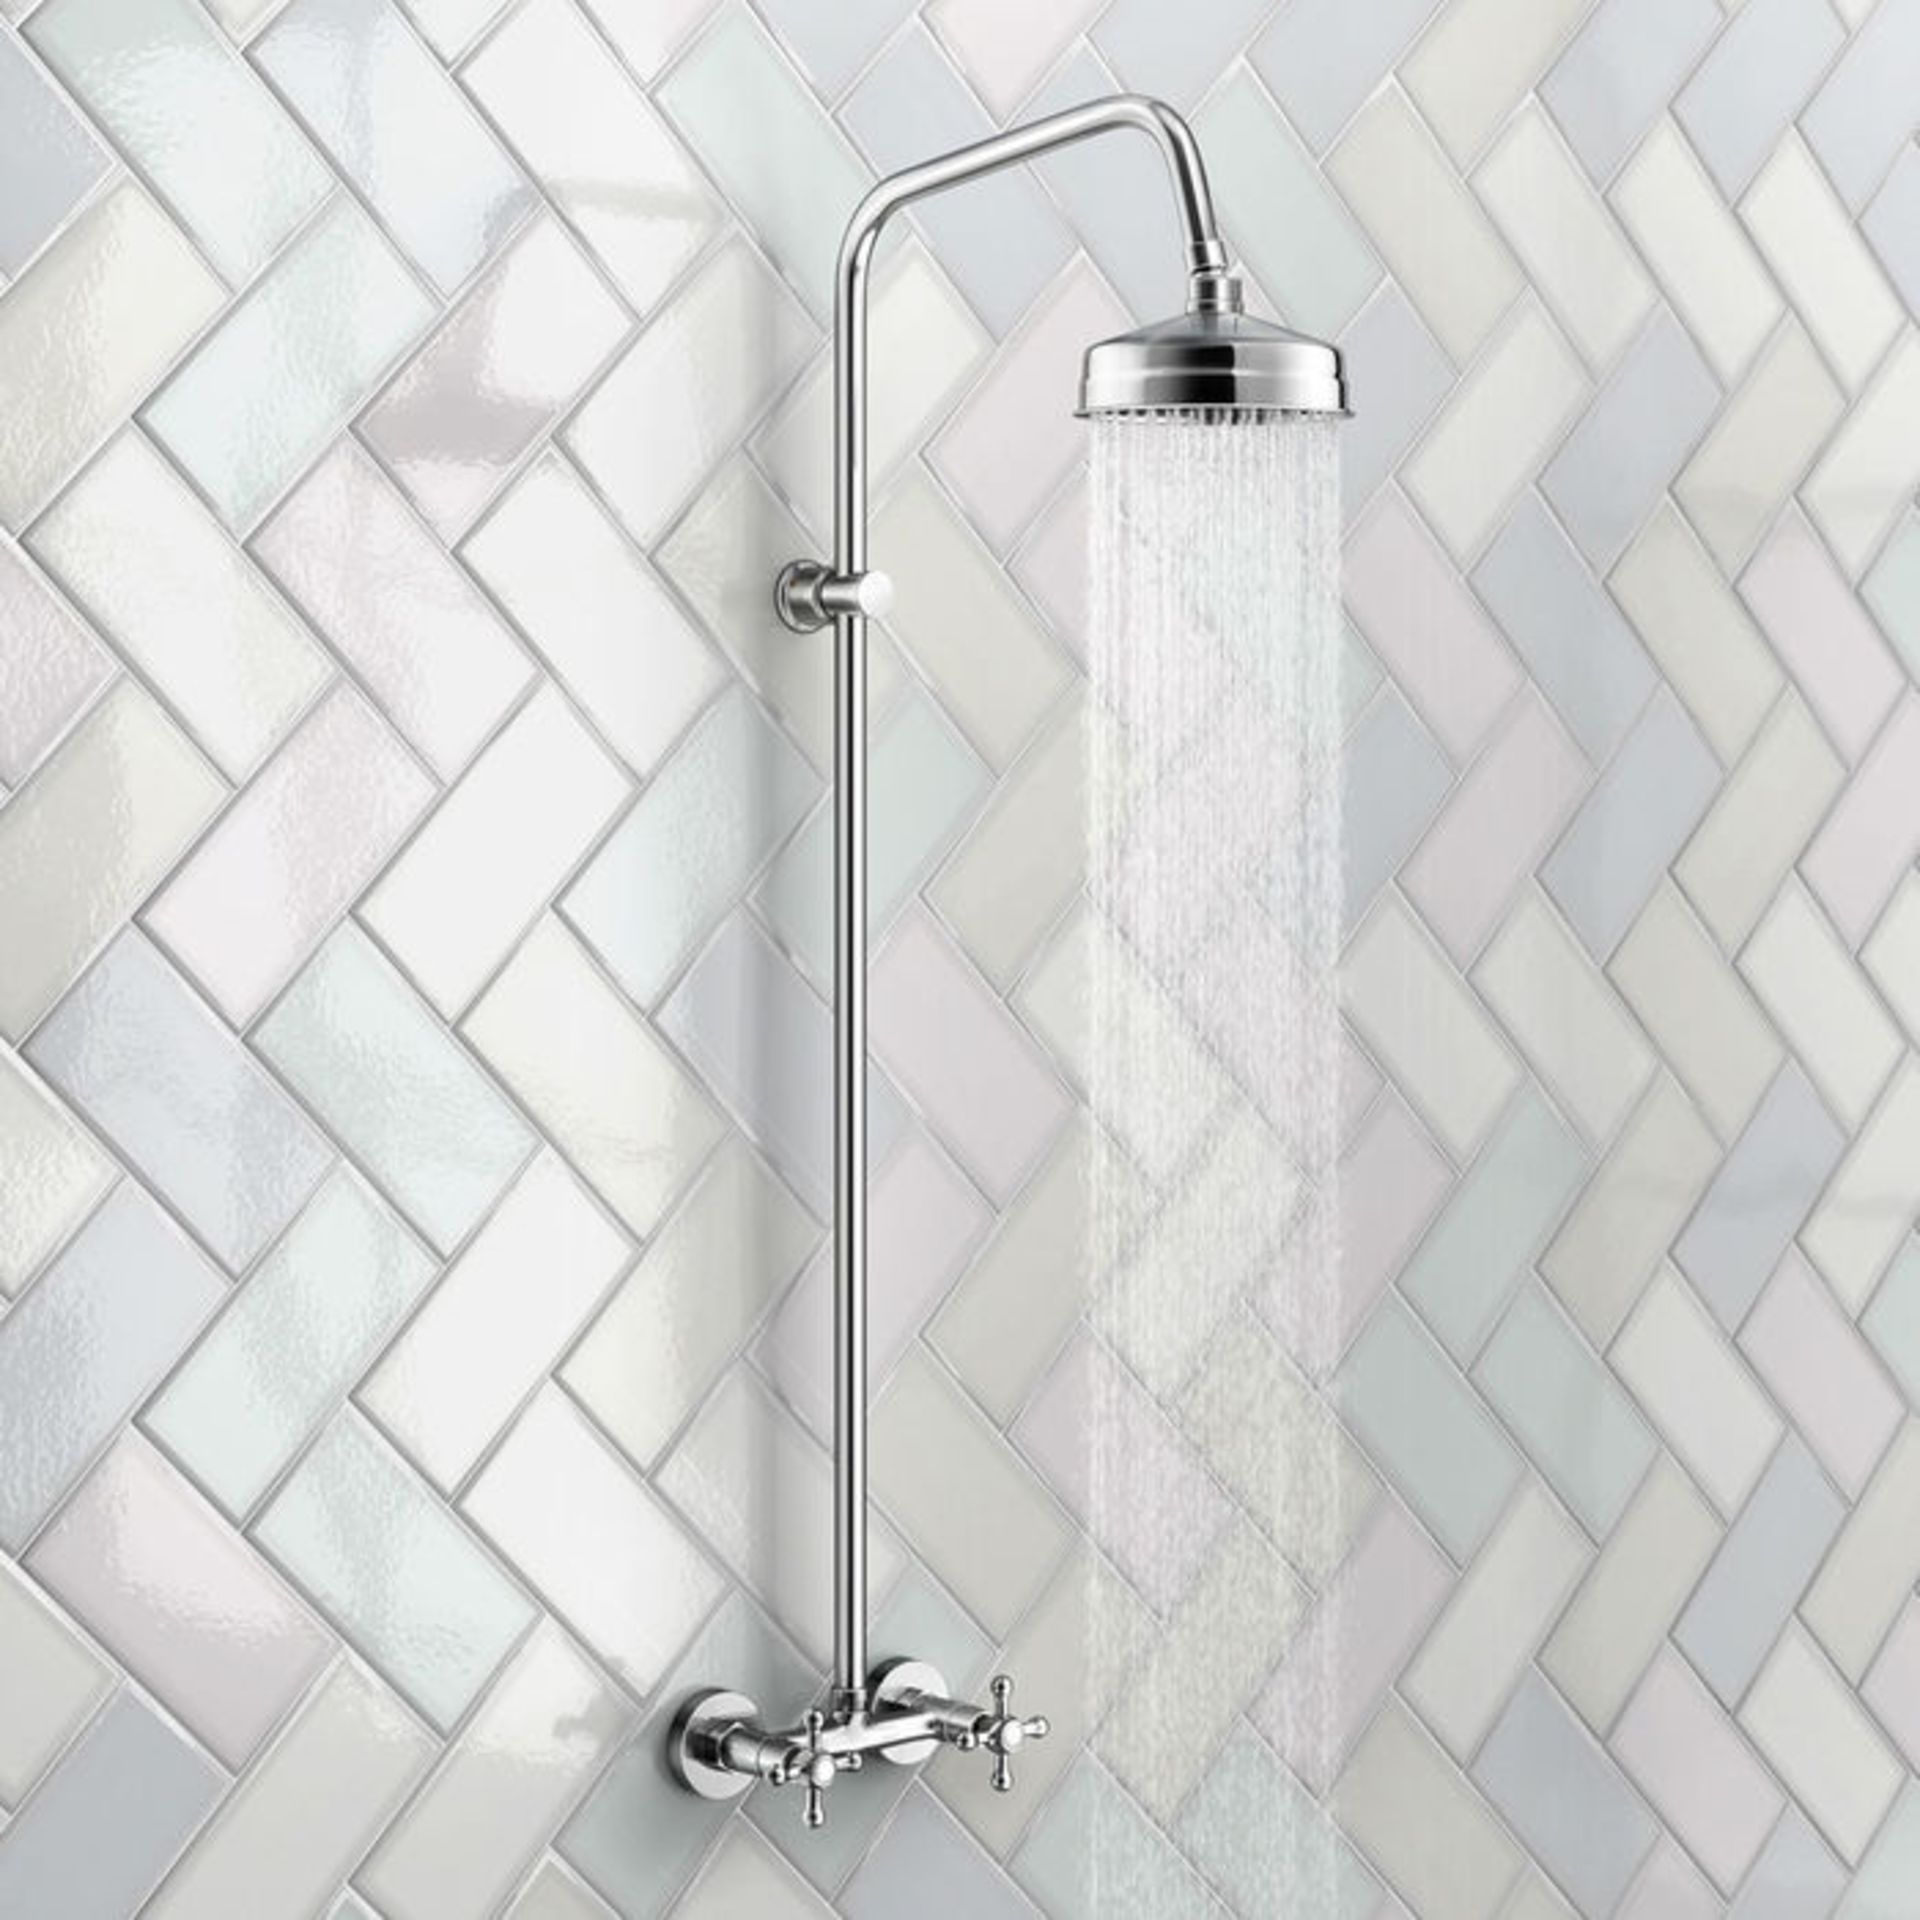 (Q68) Traditional Exposed Shower Medium Head. Exposed design makes for a statement pieceStunning